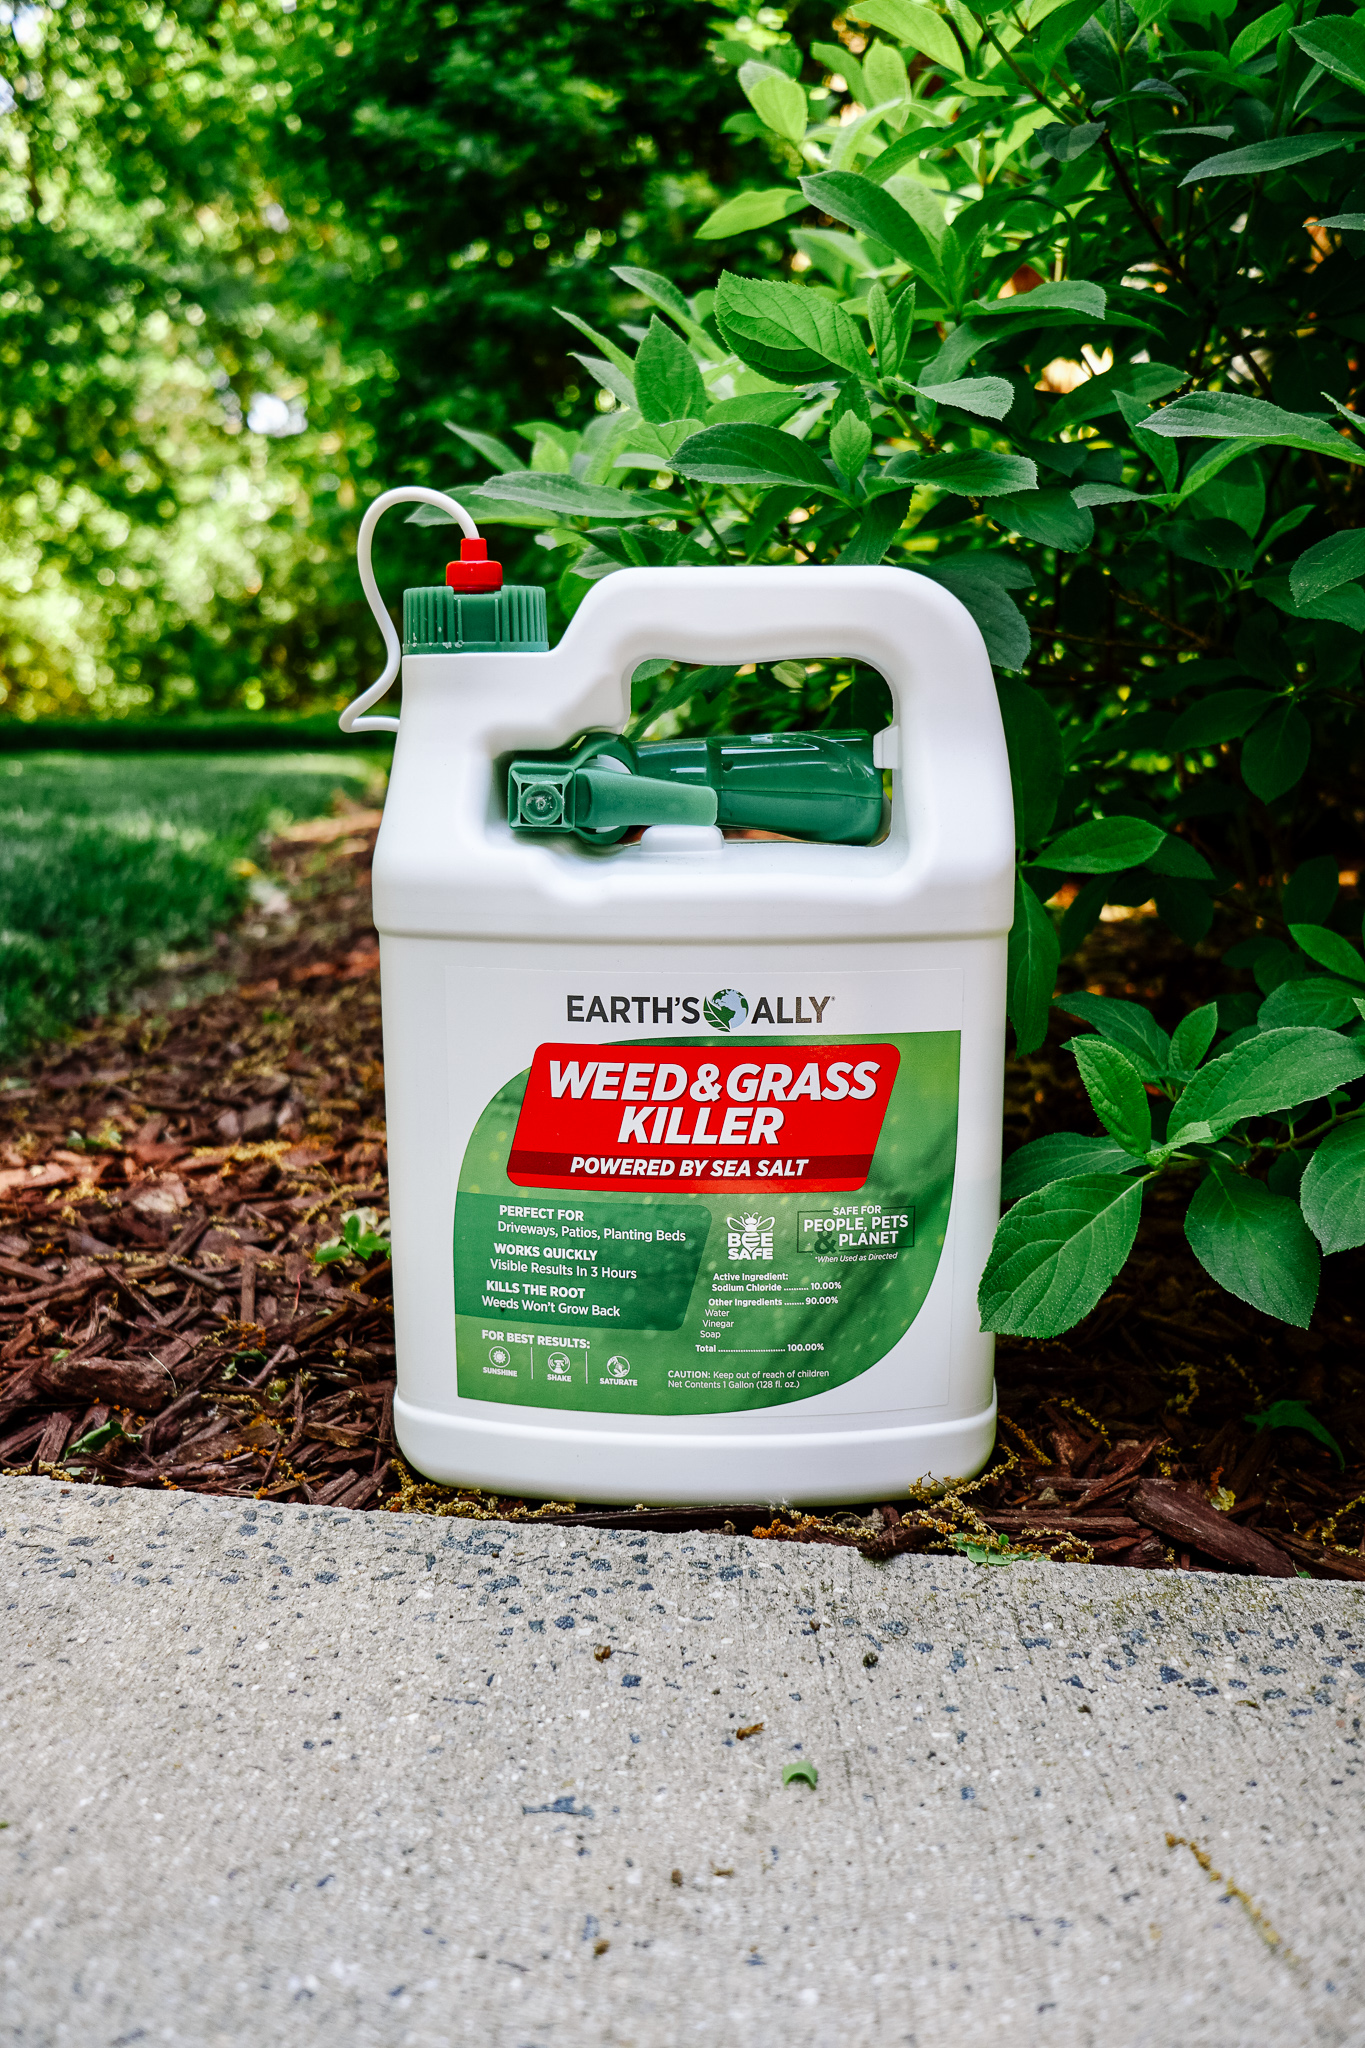 Earth's Ally Review: Truly non-toxic lawn and garden products